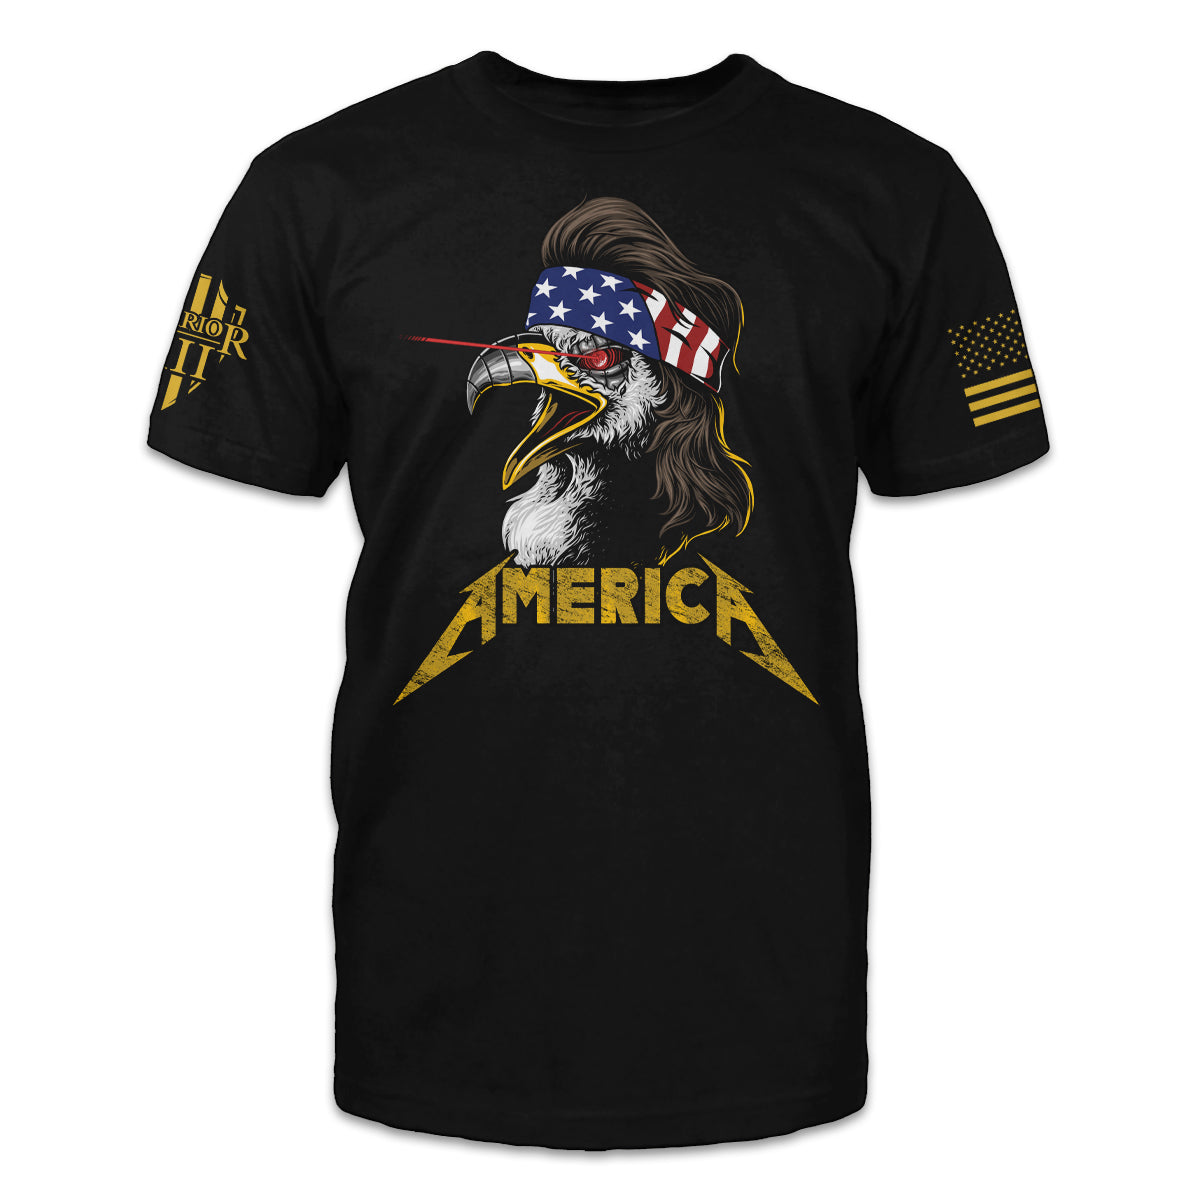 A black t-shirt with "America" and an USA eagle printed on the front of the shirt.